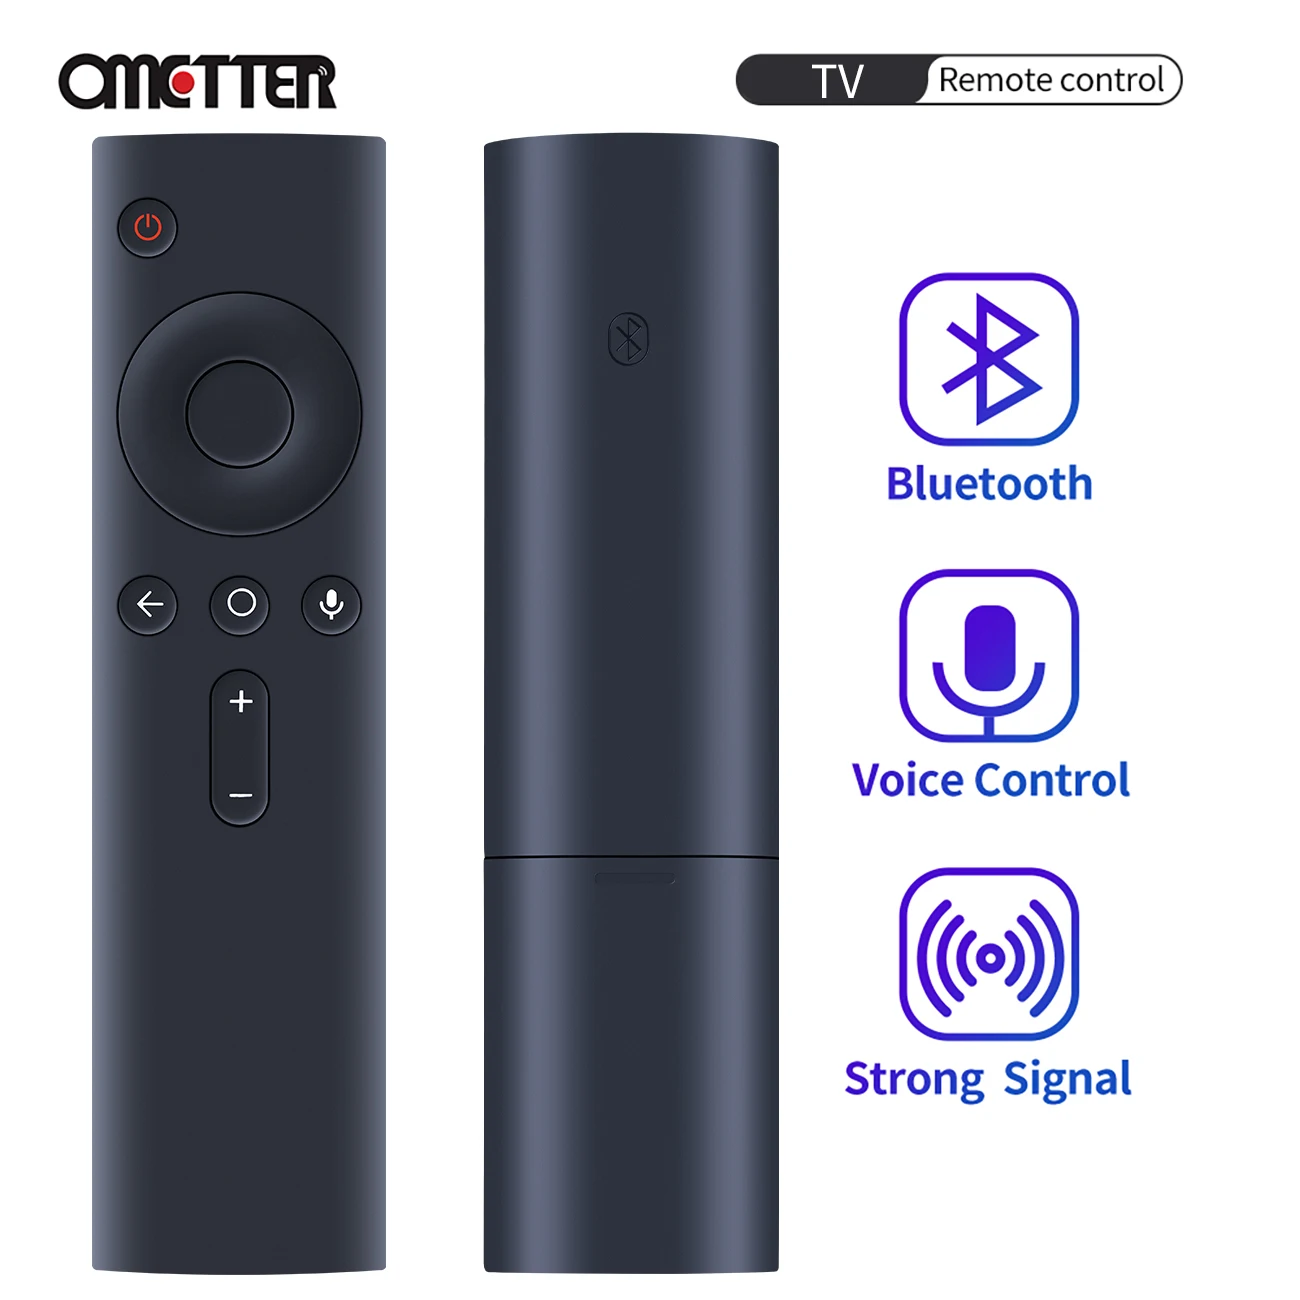 

New Replacement XMRM-002 For Xiaomi MI 4K Ultra HDR TV Box 3 with Voice Search Bluetooth Remote Control MDZ-16-AB